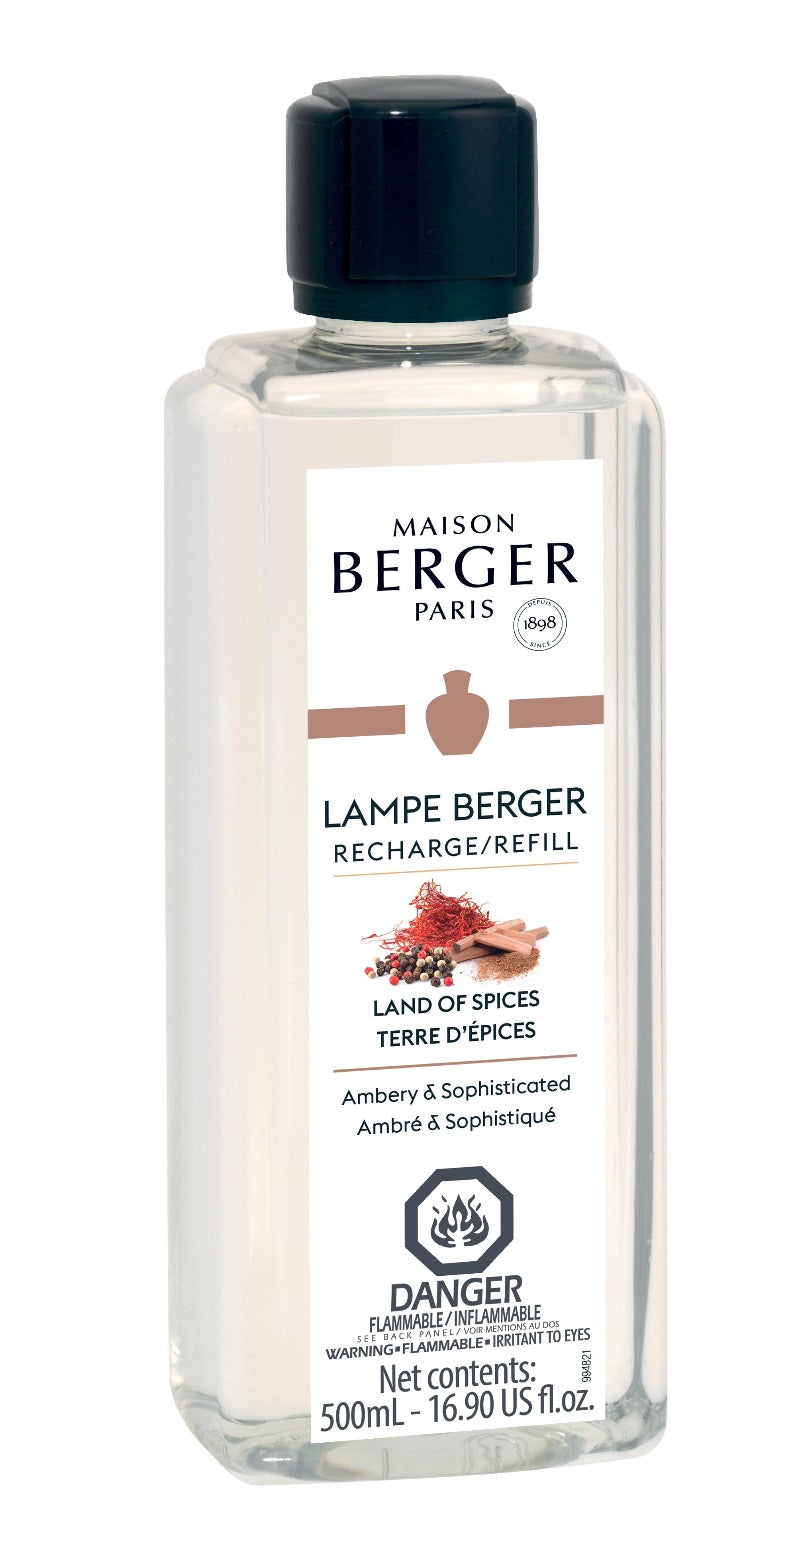 Maison Berger Land of Spices 500ml Refill for Lampe Berger